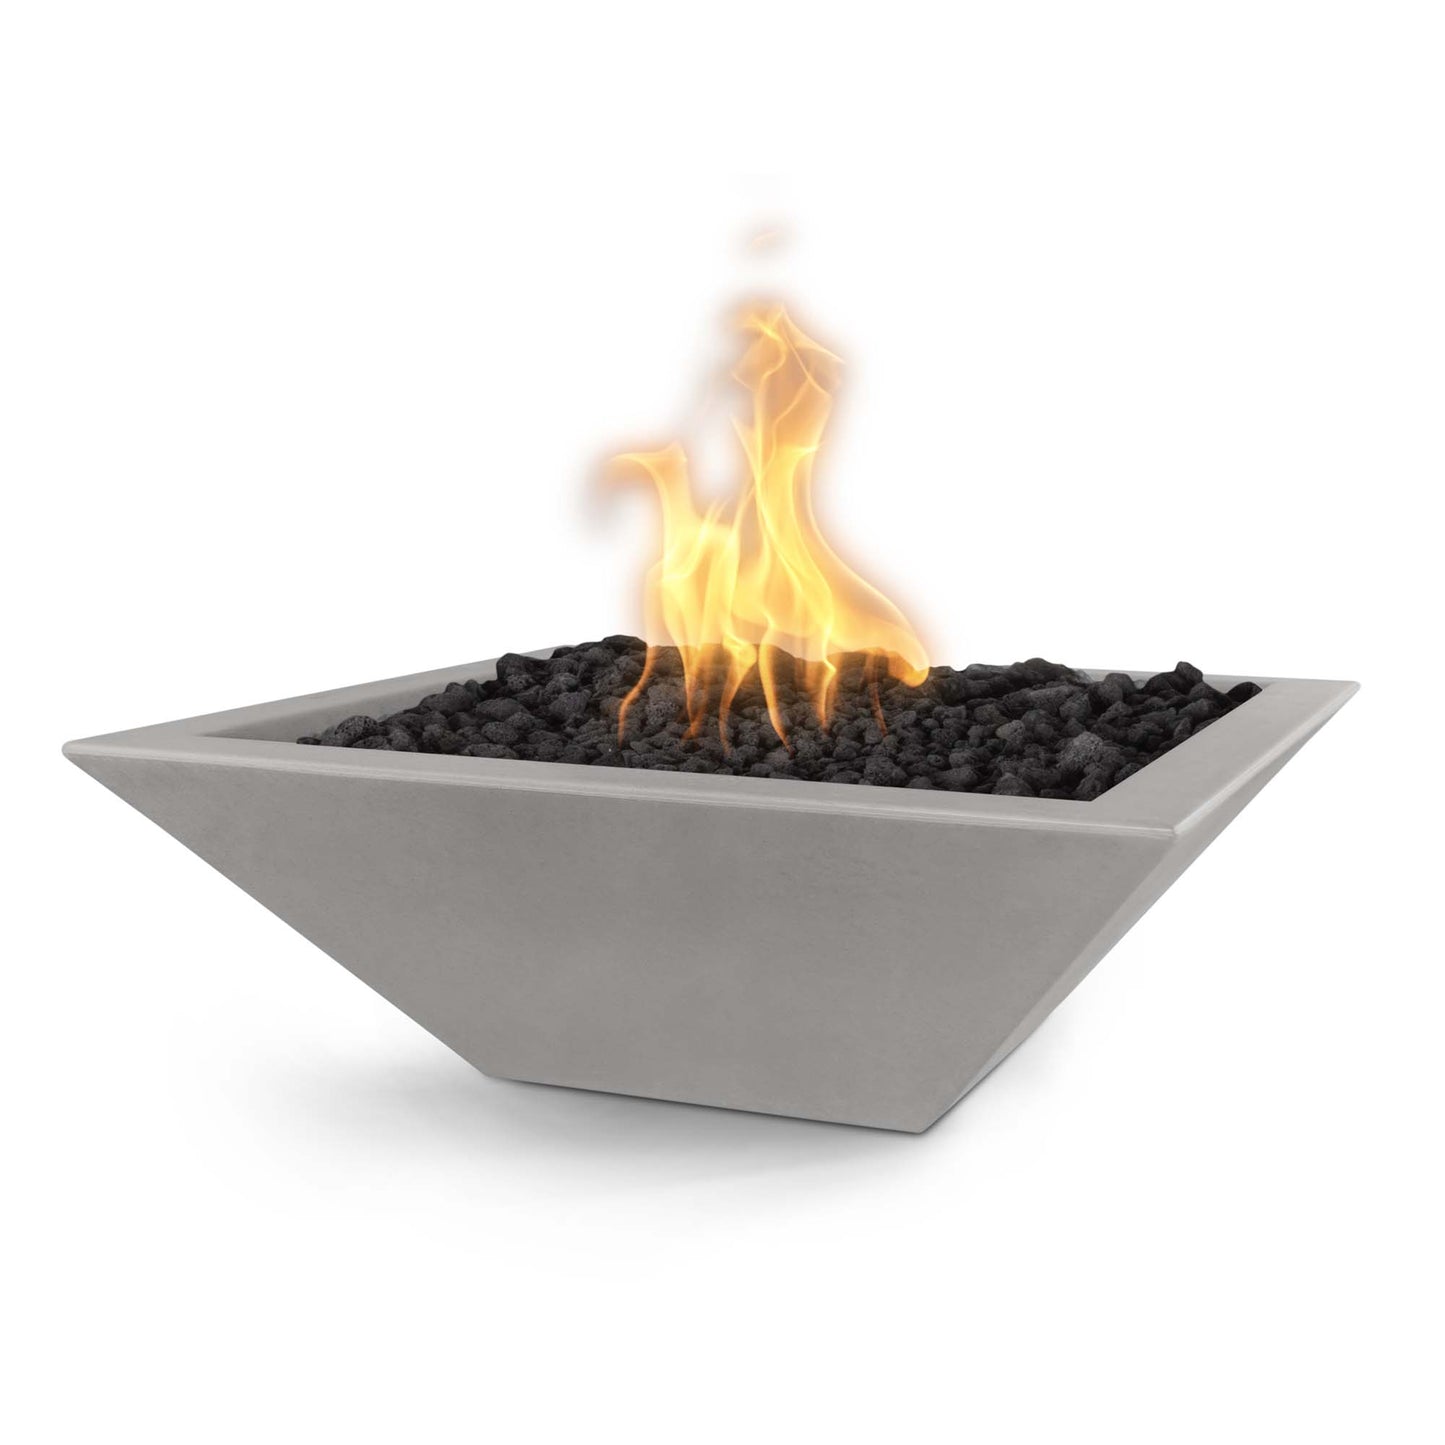 The Outdoor Plus Square Maya 24" Metallic Bronze GFRC Concrete Liquid Propane Fire Bowl with Match Lit with Flame Sense Ignition